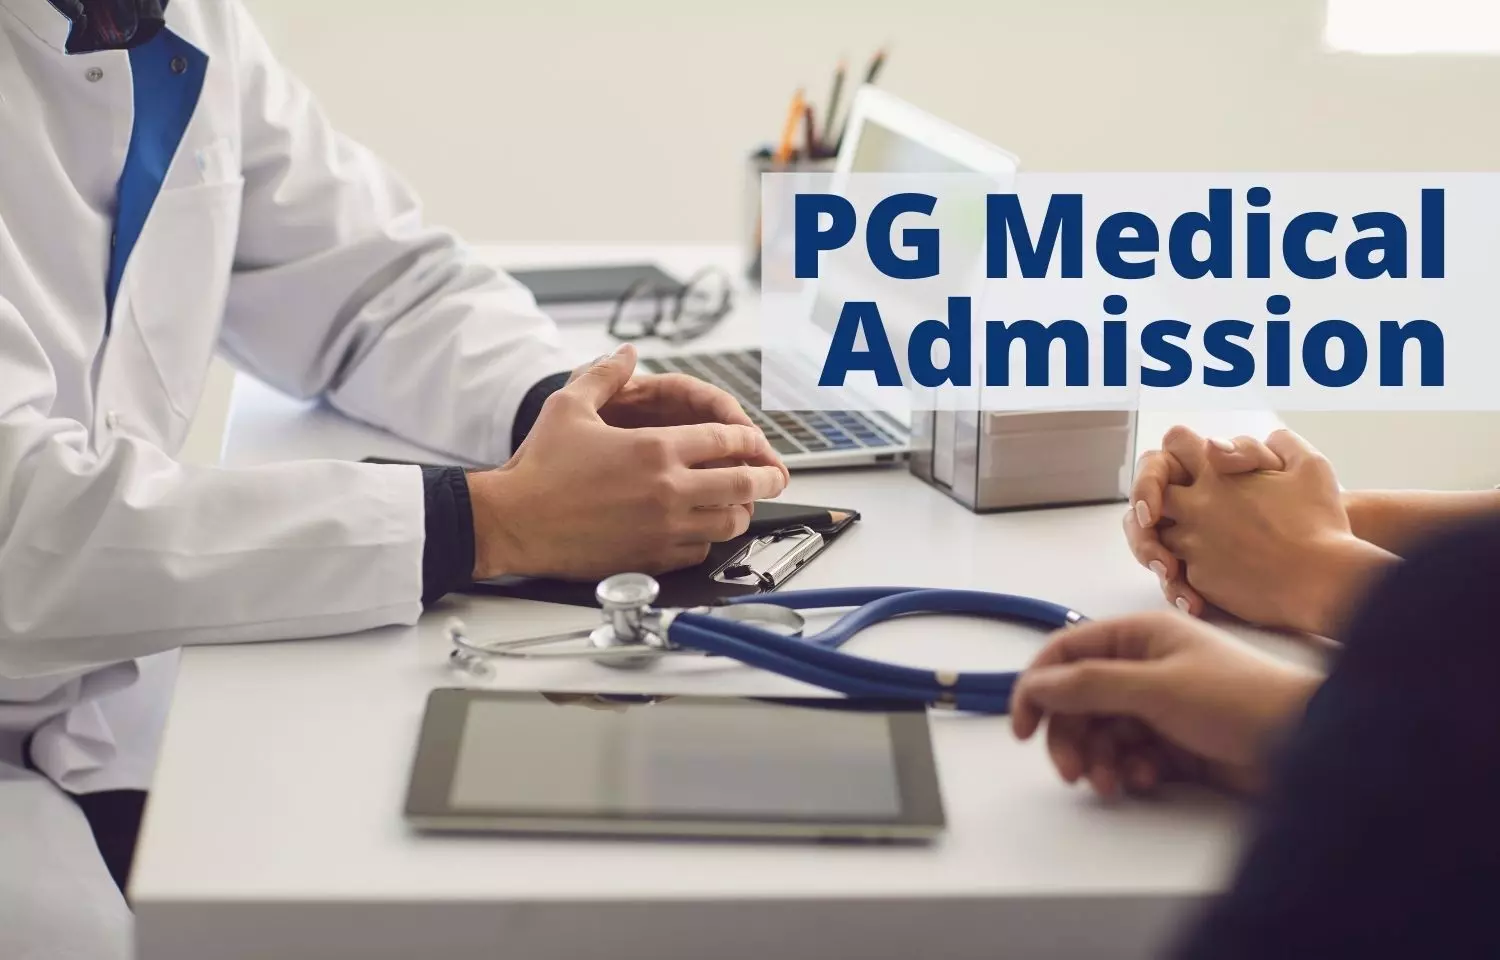 PG Medical Admissions 2021: ACPPGMEC adds 63 Seats in Round 3, Check out schedule, counselling details